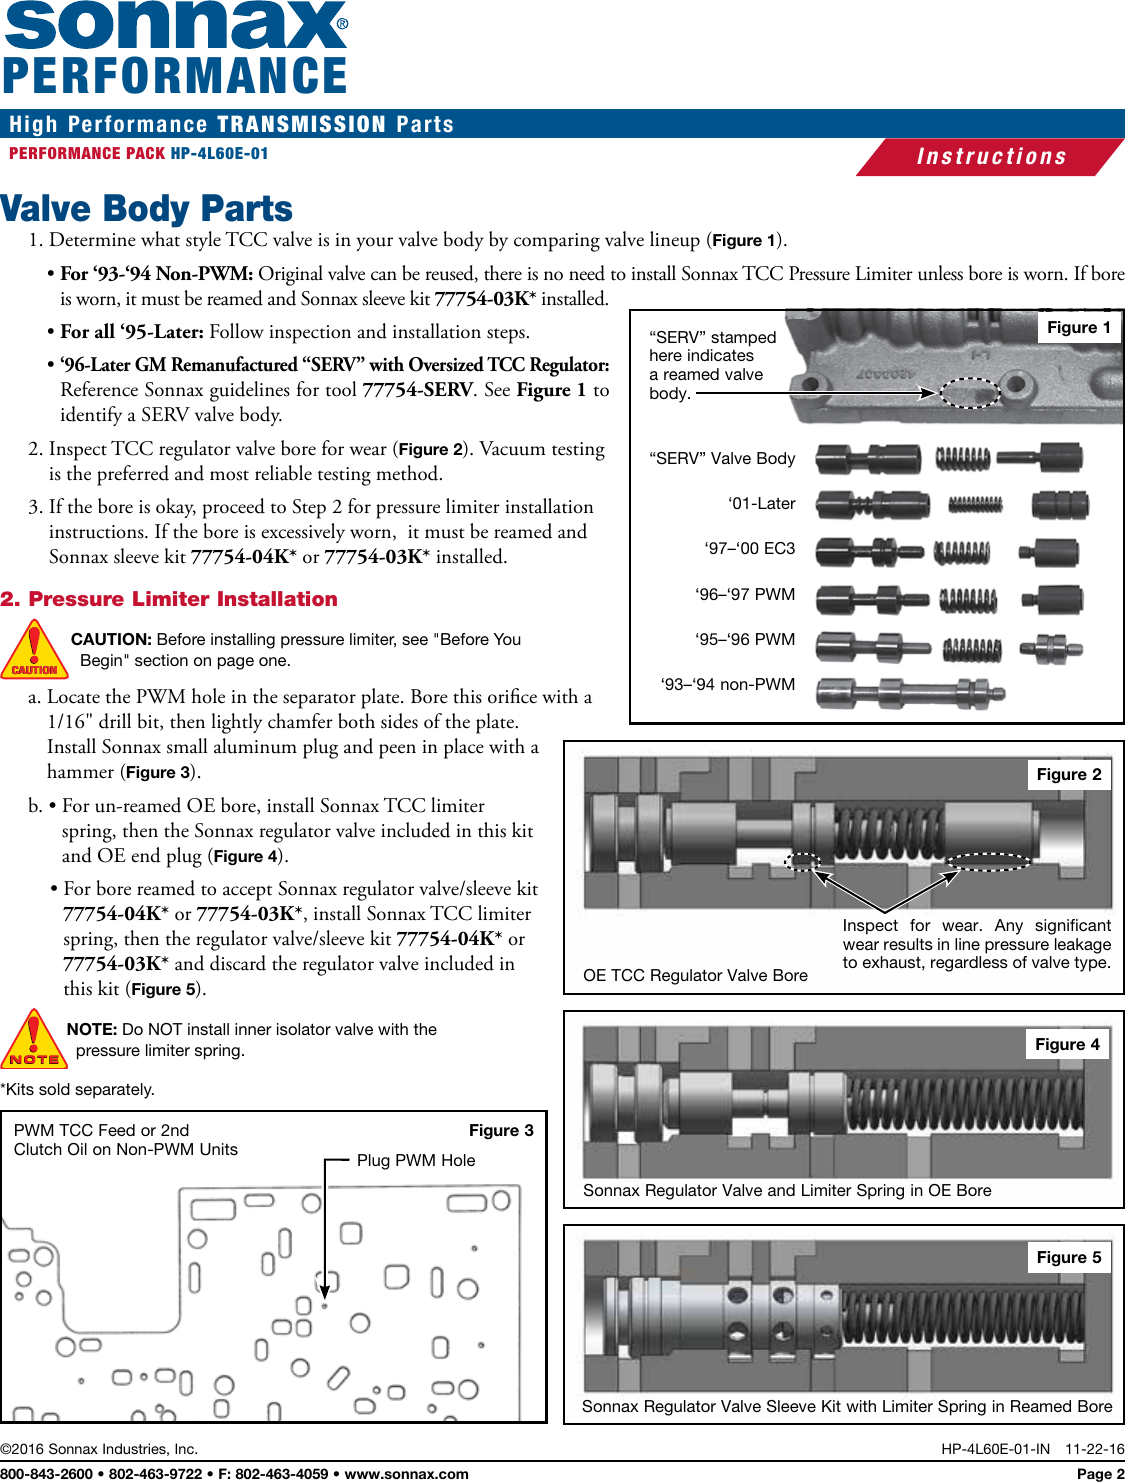 Page 2 of 5 - HP-4L60E-01-IN